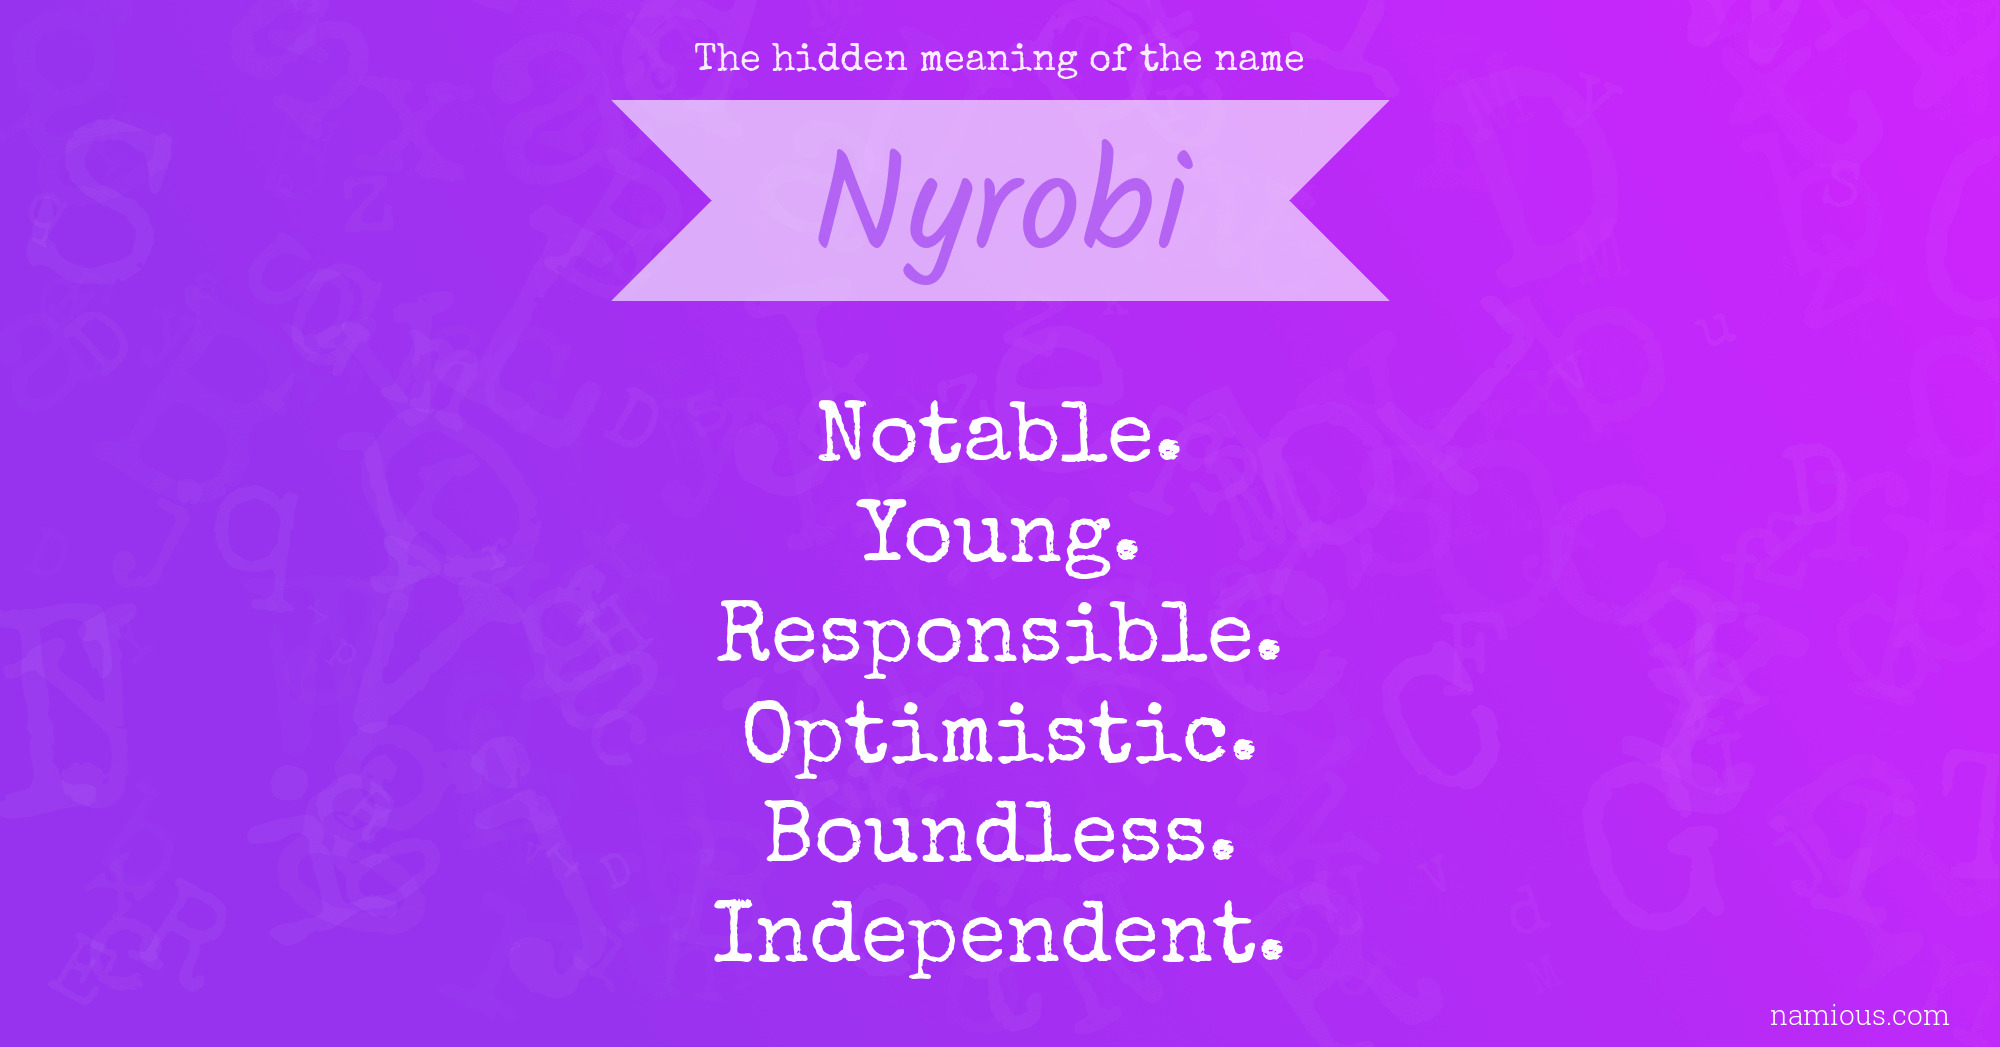 The hidden meaning of the name Nyrobi | Namious